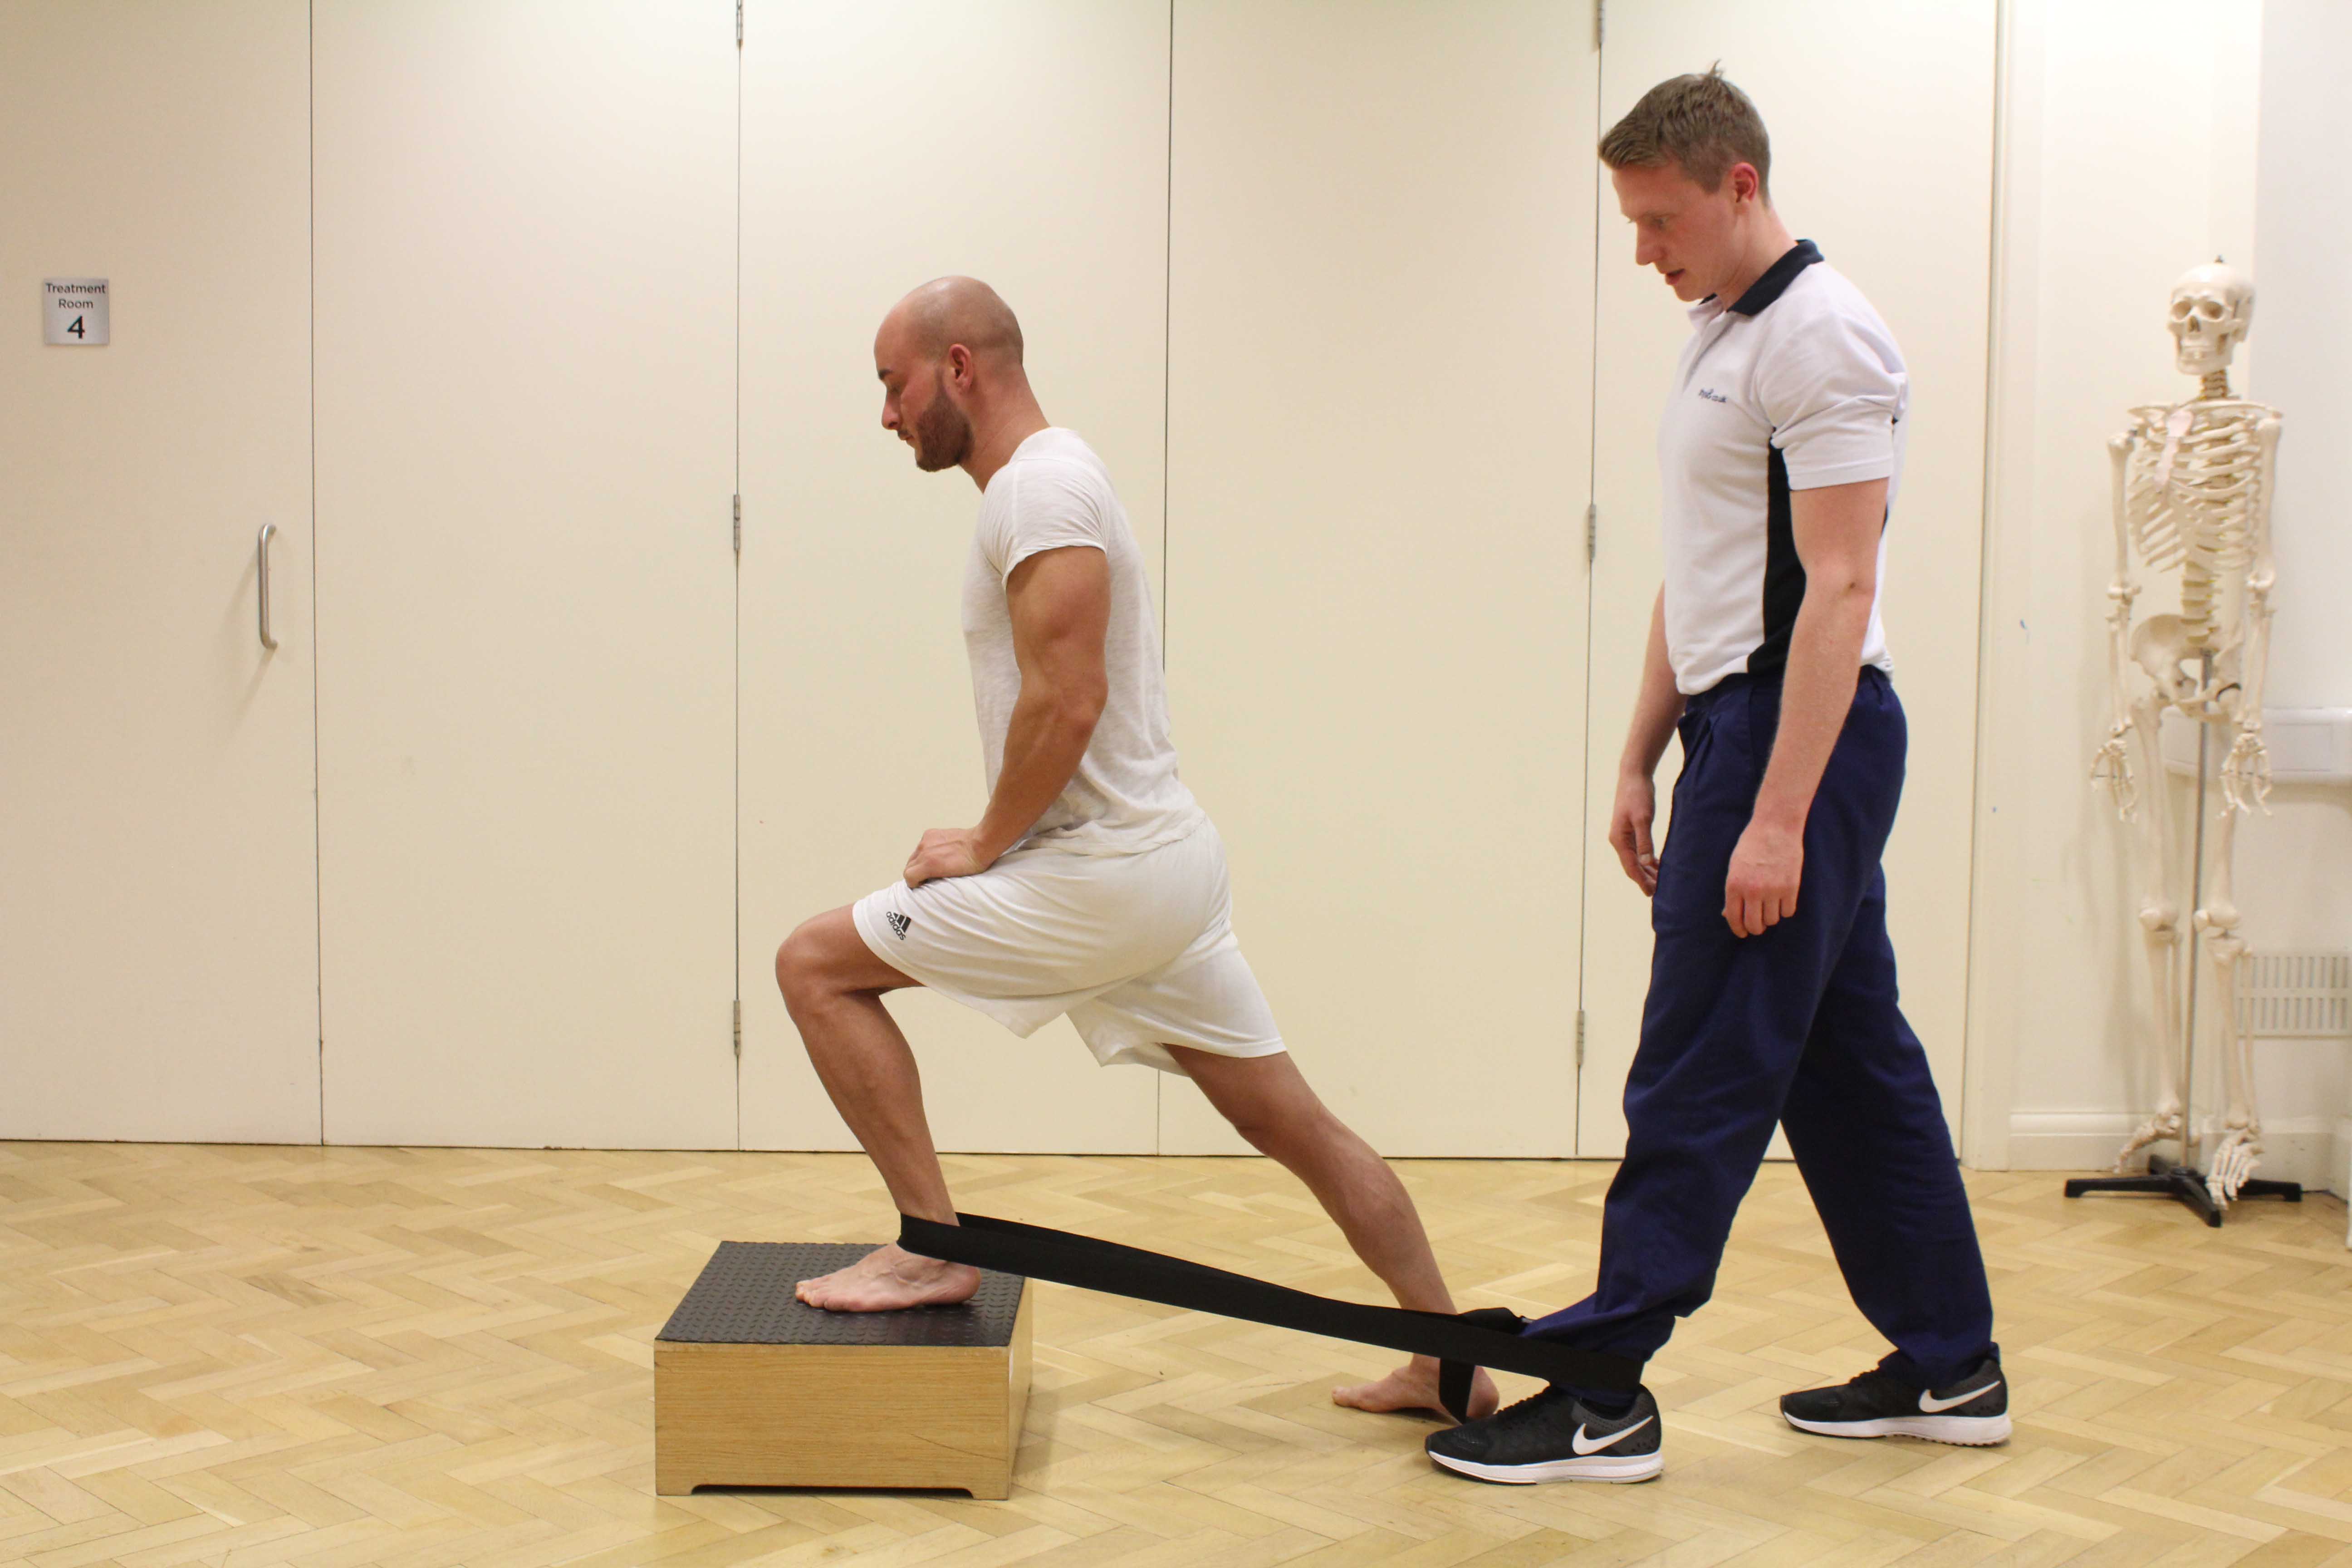 Mobilisation exercise for anterior impingement of the ankle